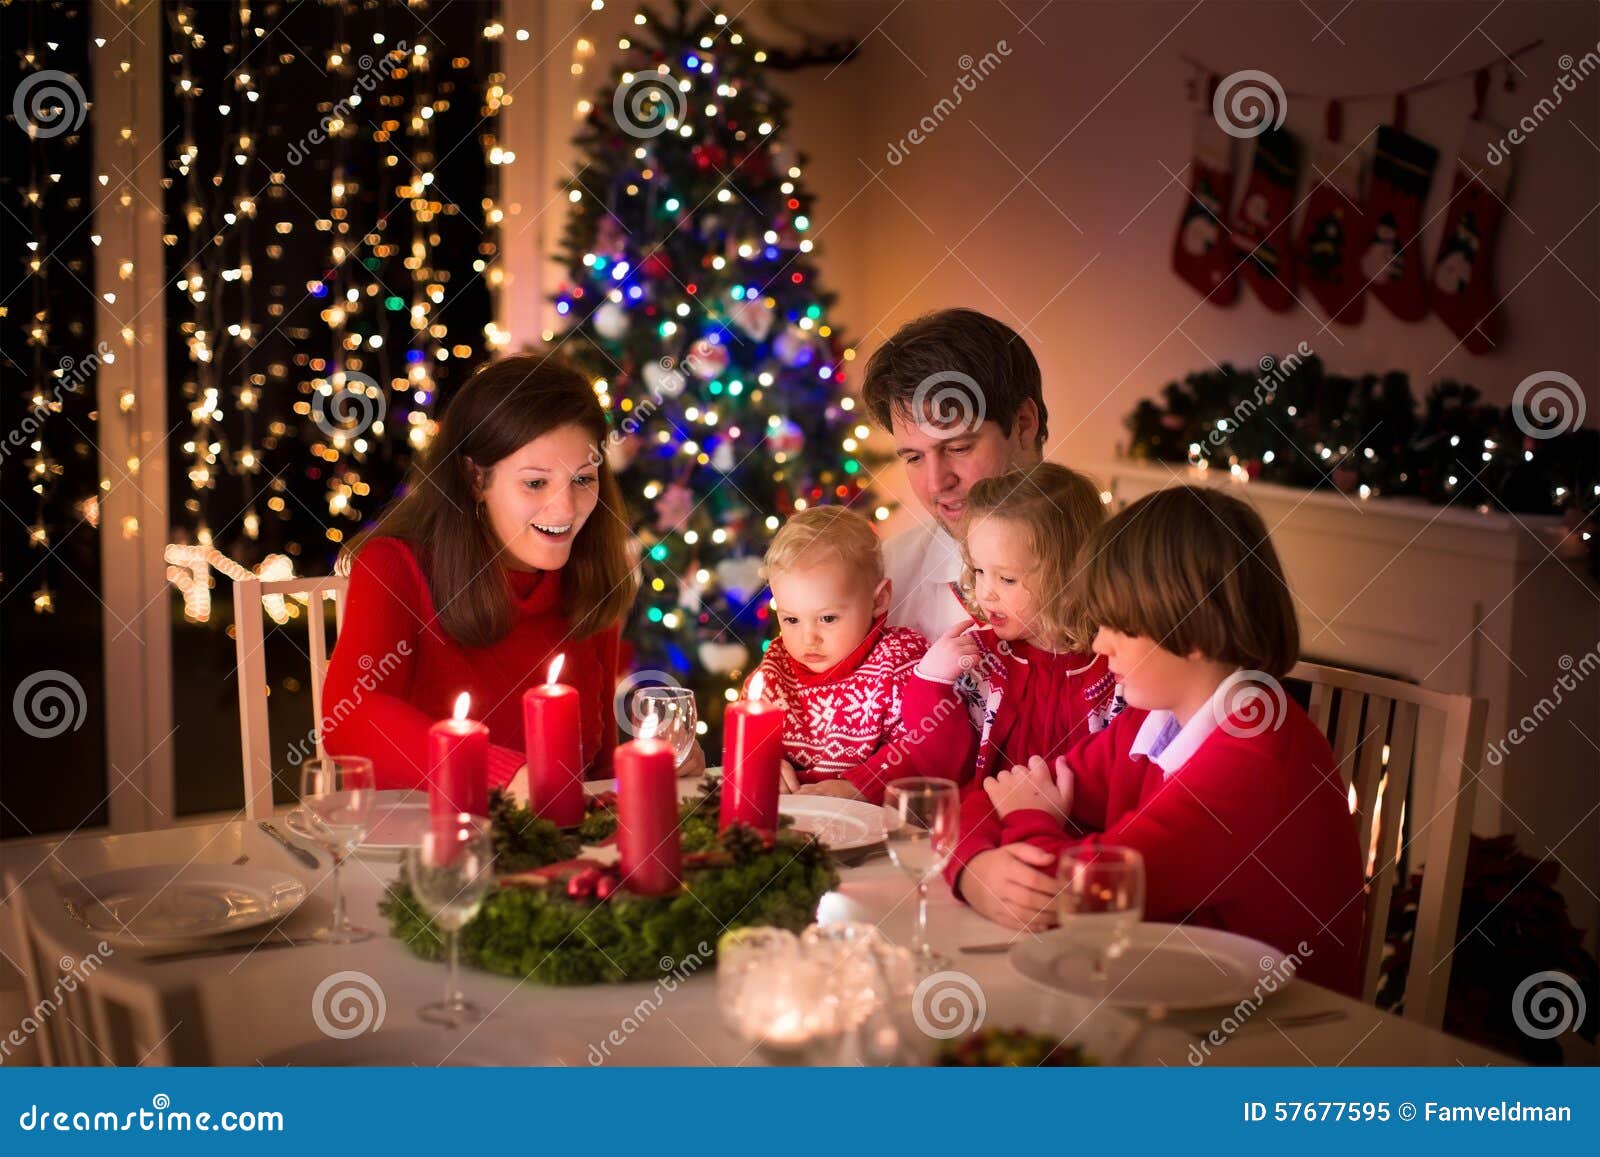 Family Having Christmas Dinner At Fire Place Stock Photo ...